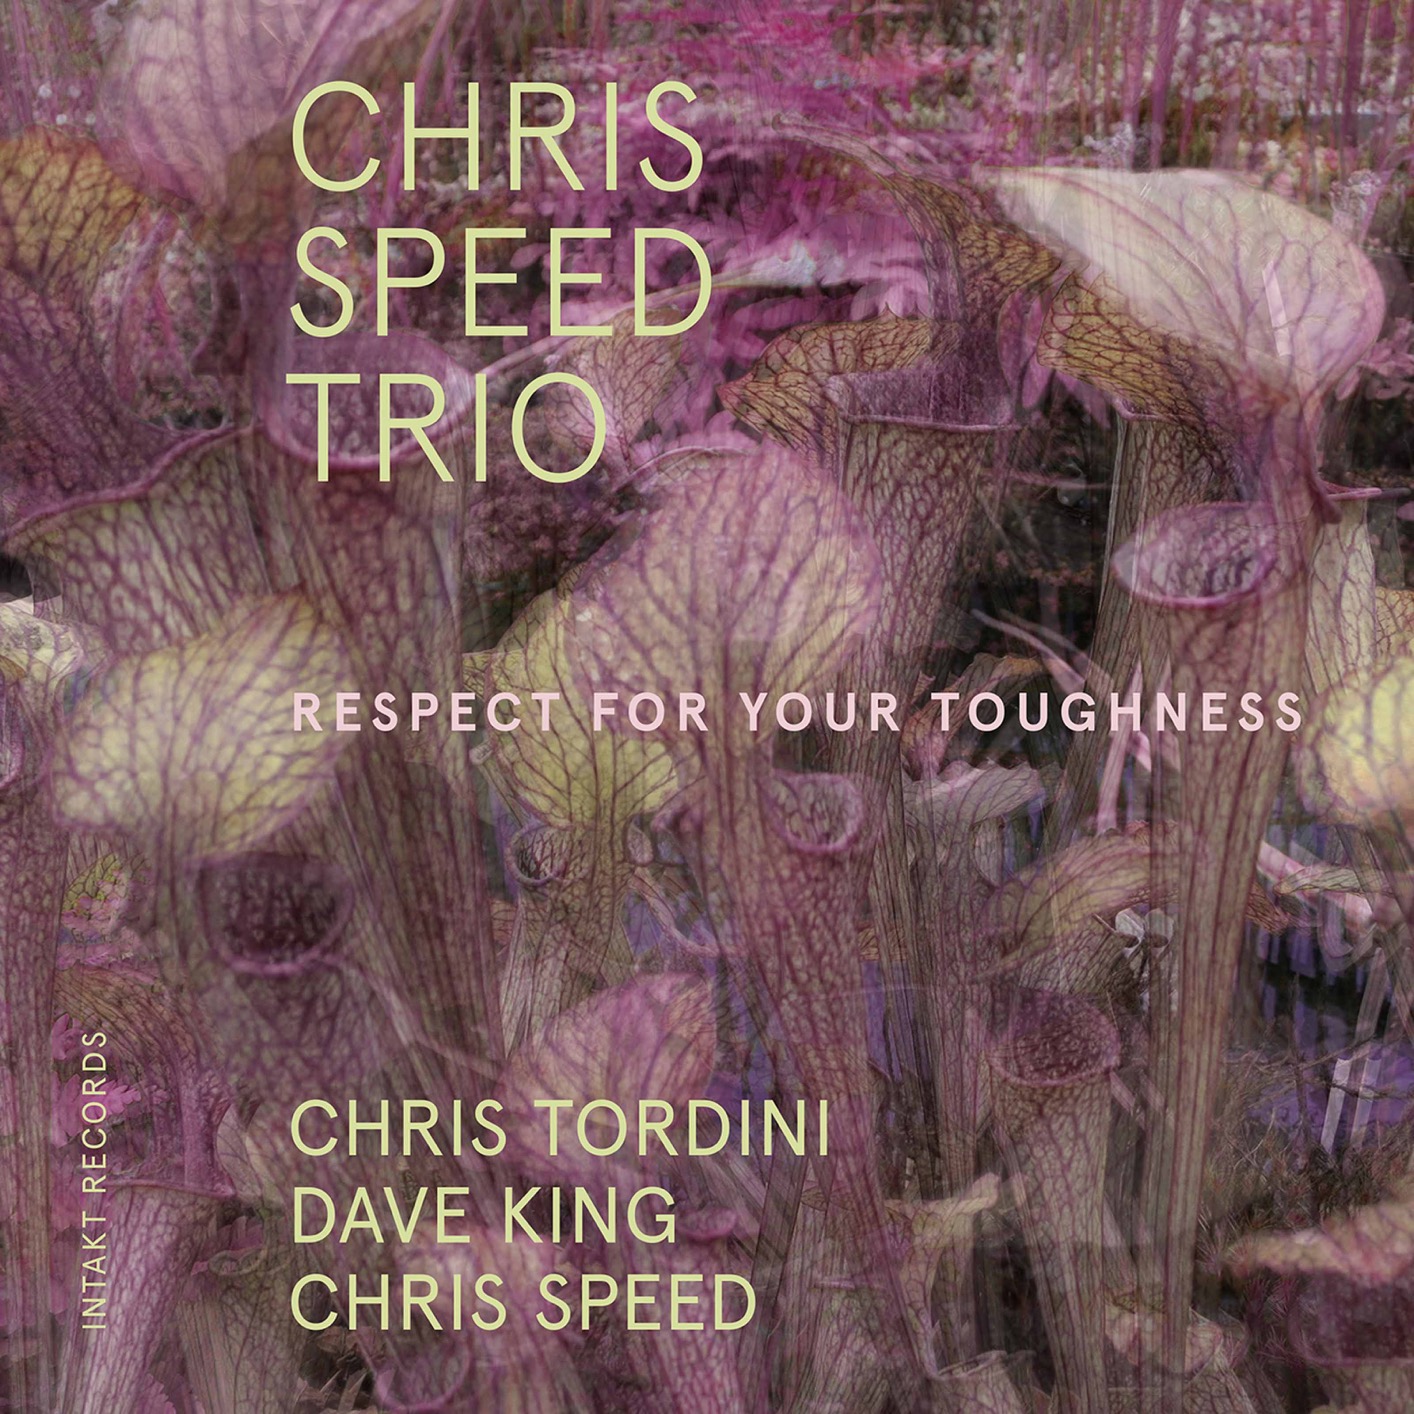 Chris Speed Trio - Respect for Your Toughness (feat. Chris Tordini & Dave King) (2019) [FLAC 24bit/48kHz]